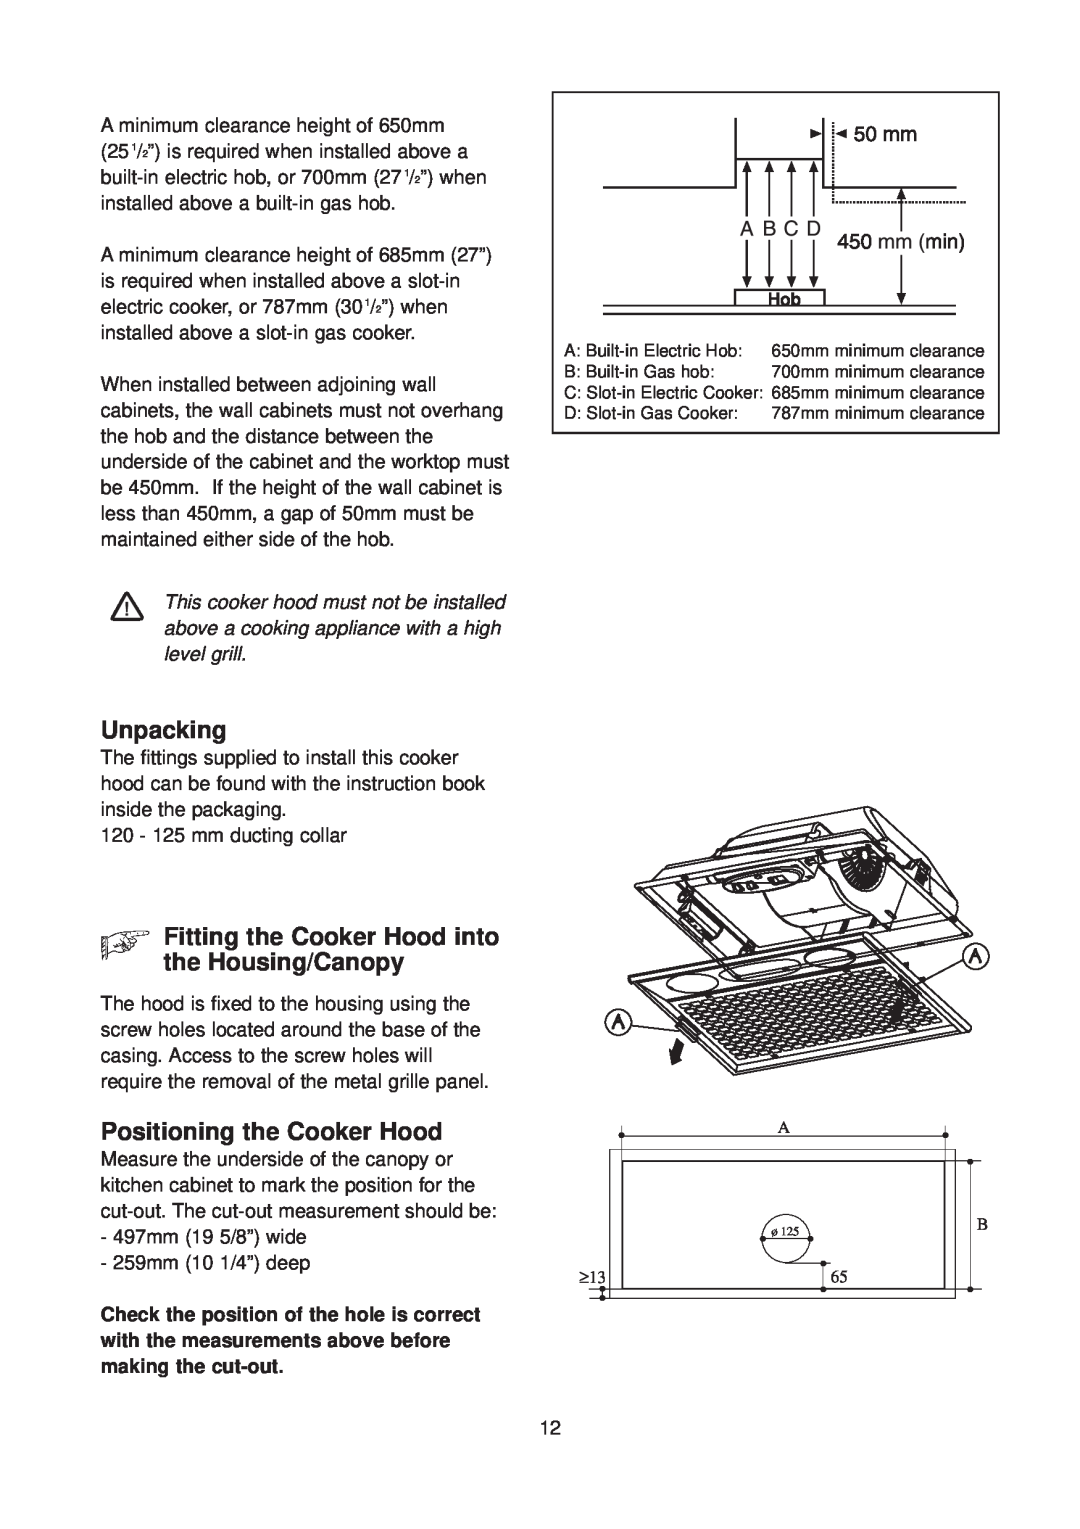 Zanussi CH 6029 GR manual Unpacking, KFitting the Cooker Hood into the Housing/Canopy, Positioning the Cooker Hood 